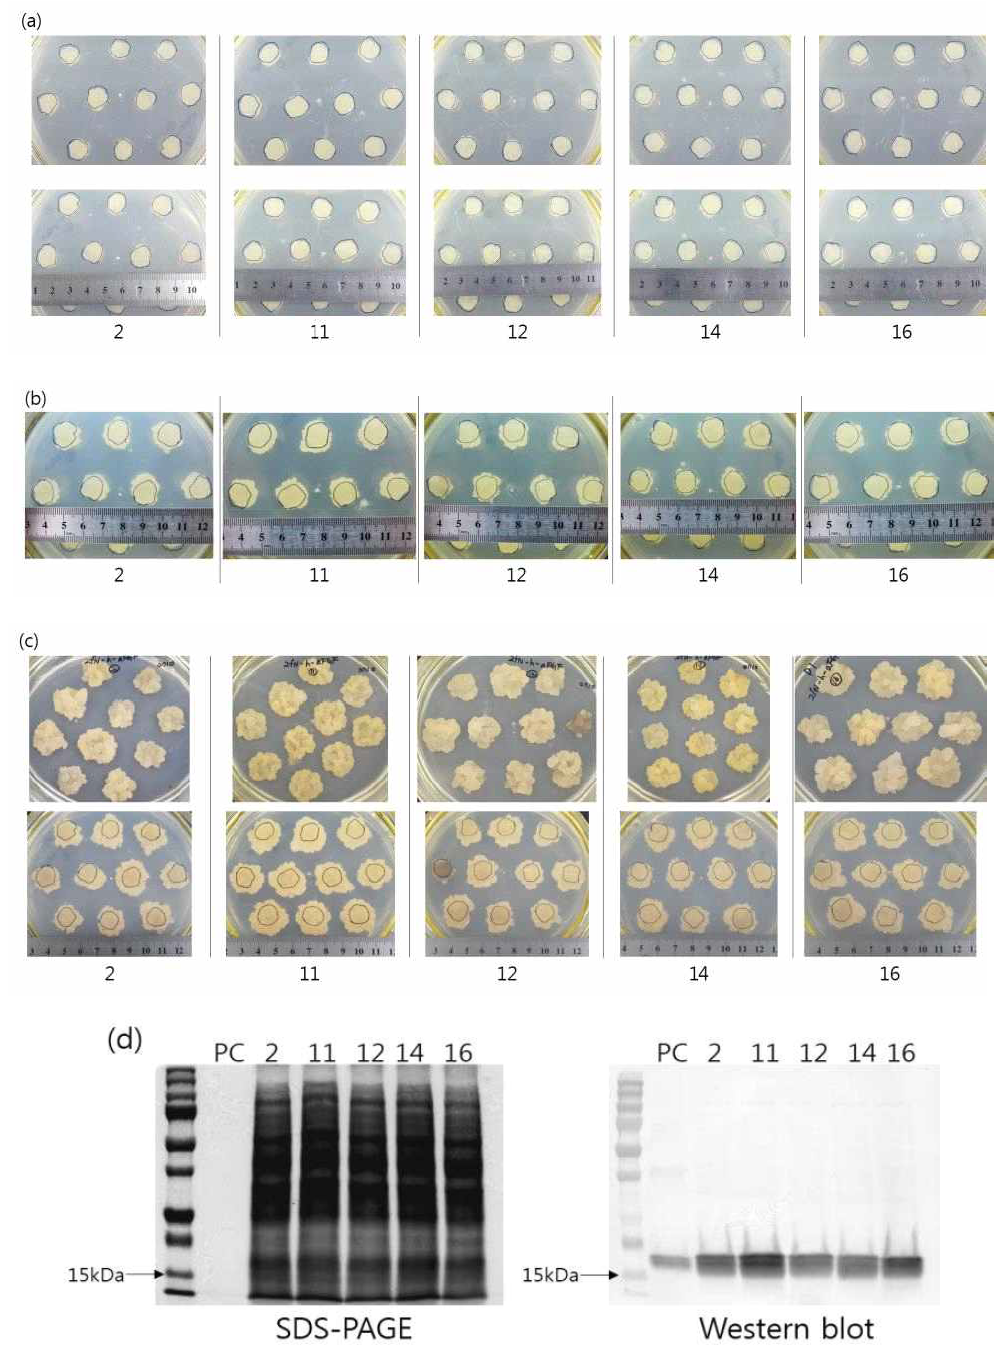 Growth and development of calli derived from pBYR2fN-his-aFGF transgenic lines. Western blot analysis of calli derived from transgenic plnat line. (a)1day after culture, (b)10days after culture, (c)20days after culture (d)Western blot. PC:Positive control